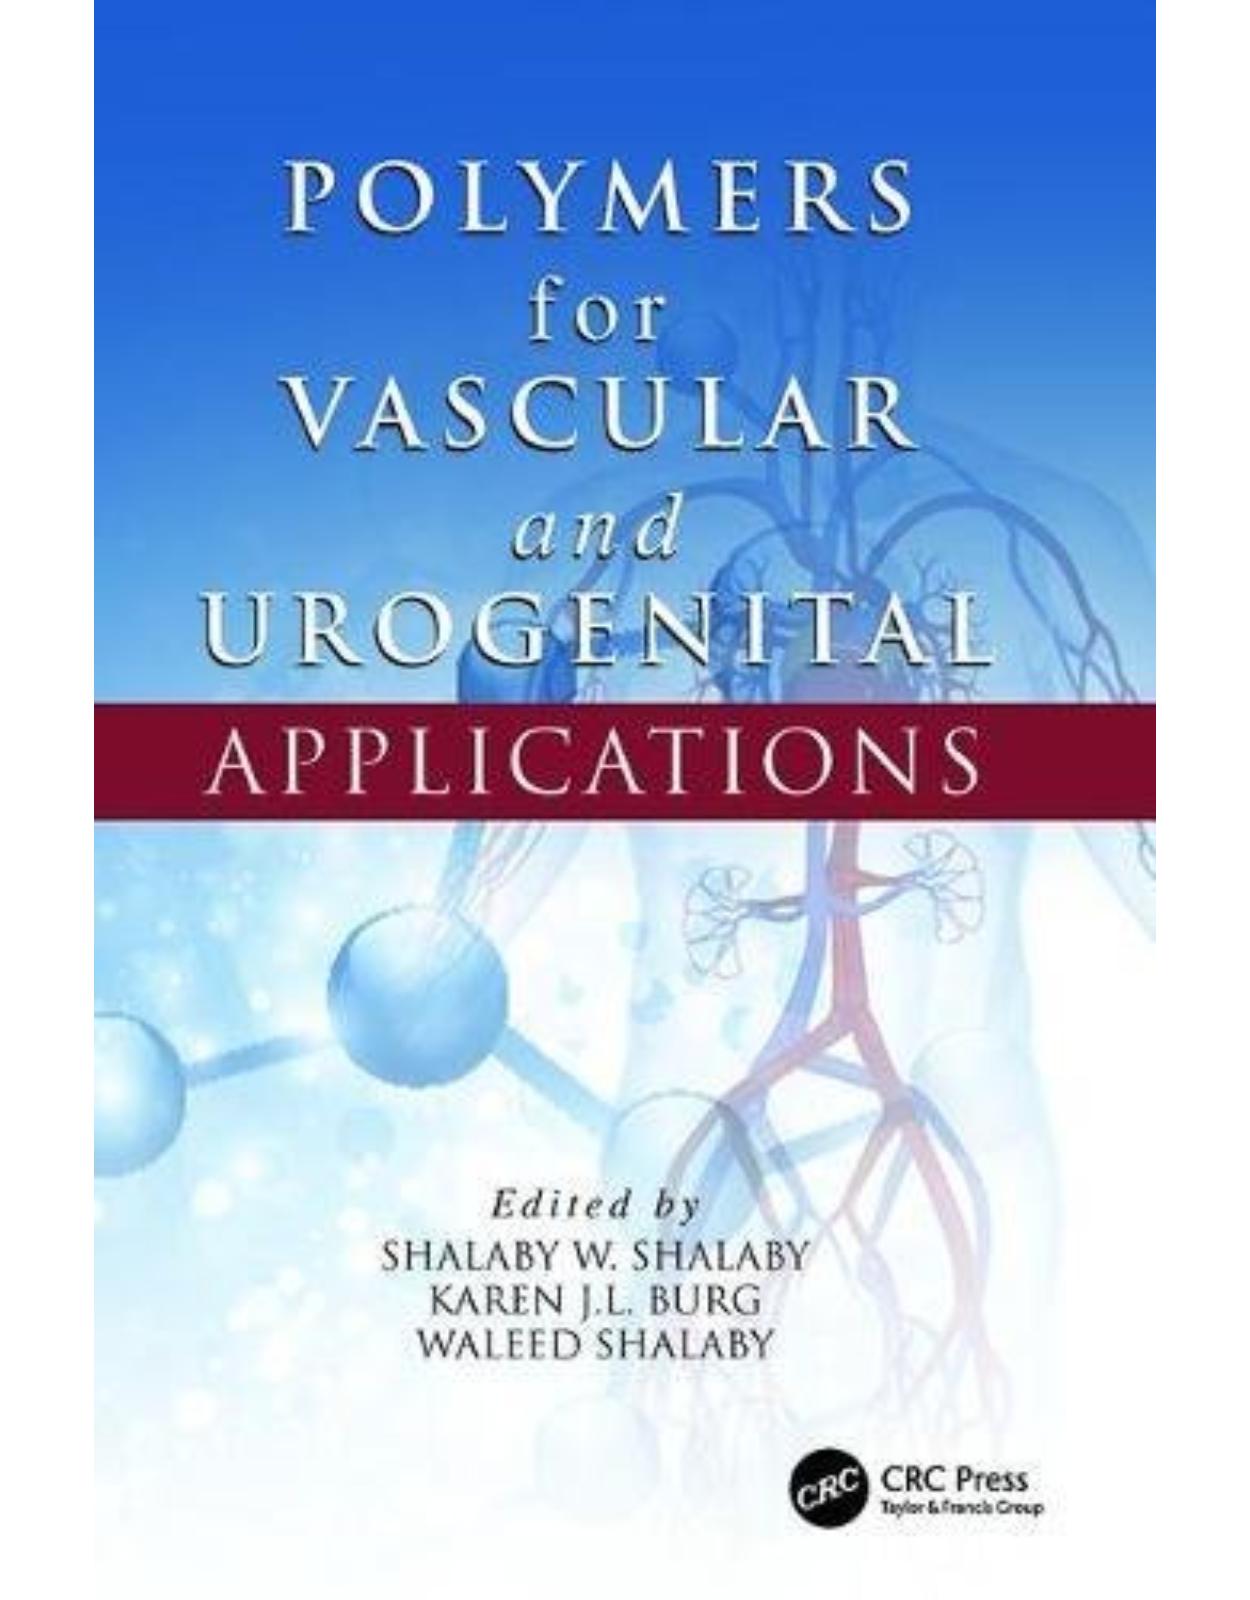  Polymers for Vascular and Urogenital Applications